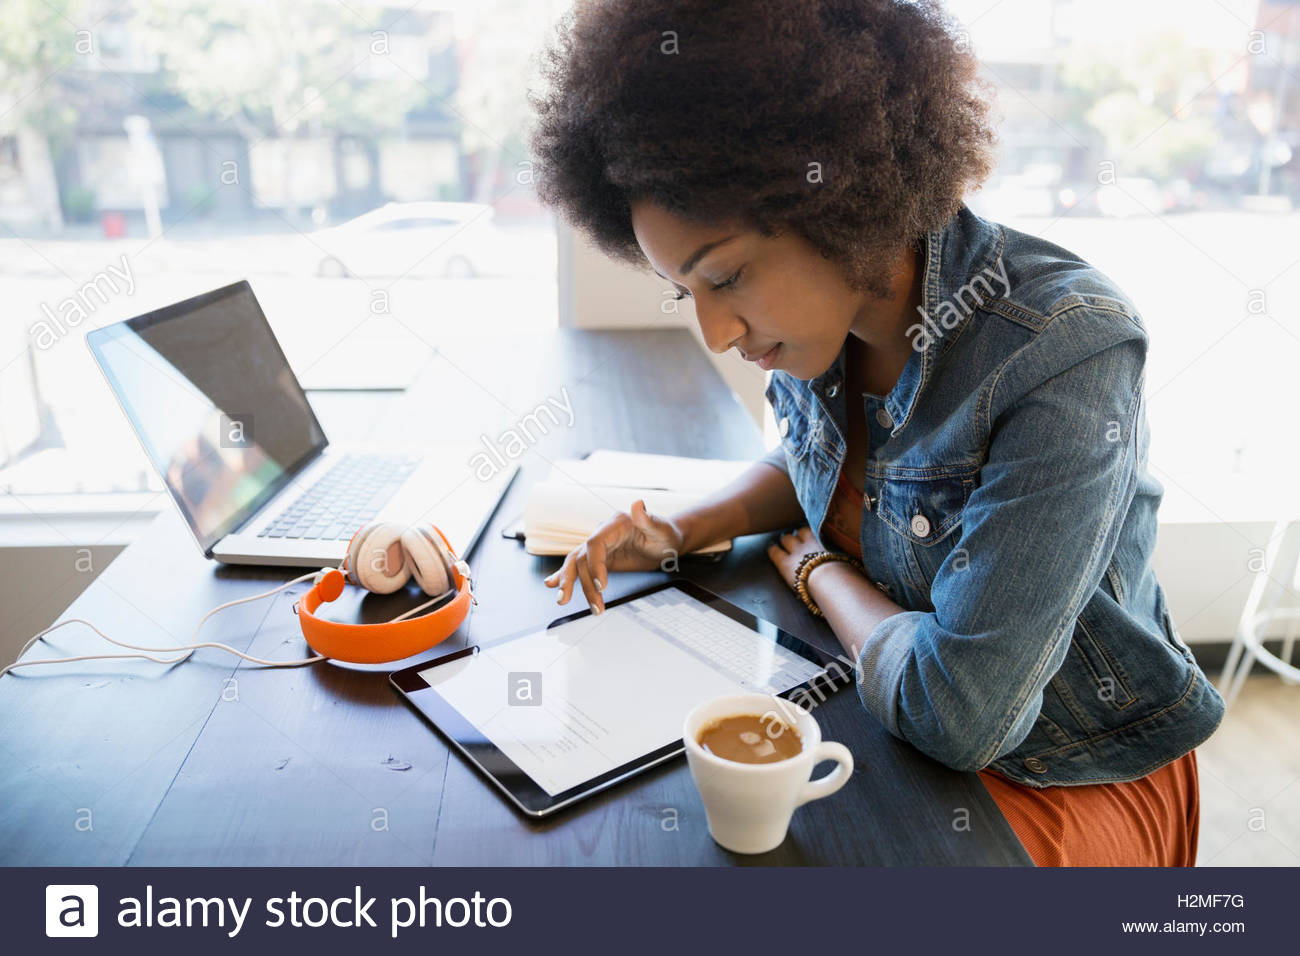 Focused woman working at digital tablet in cafe Stock Photo